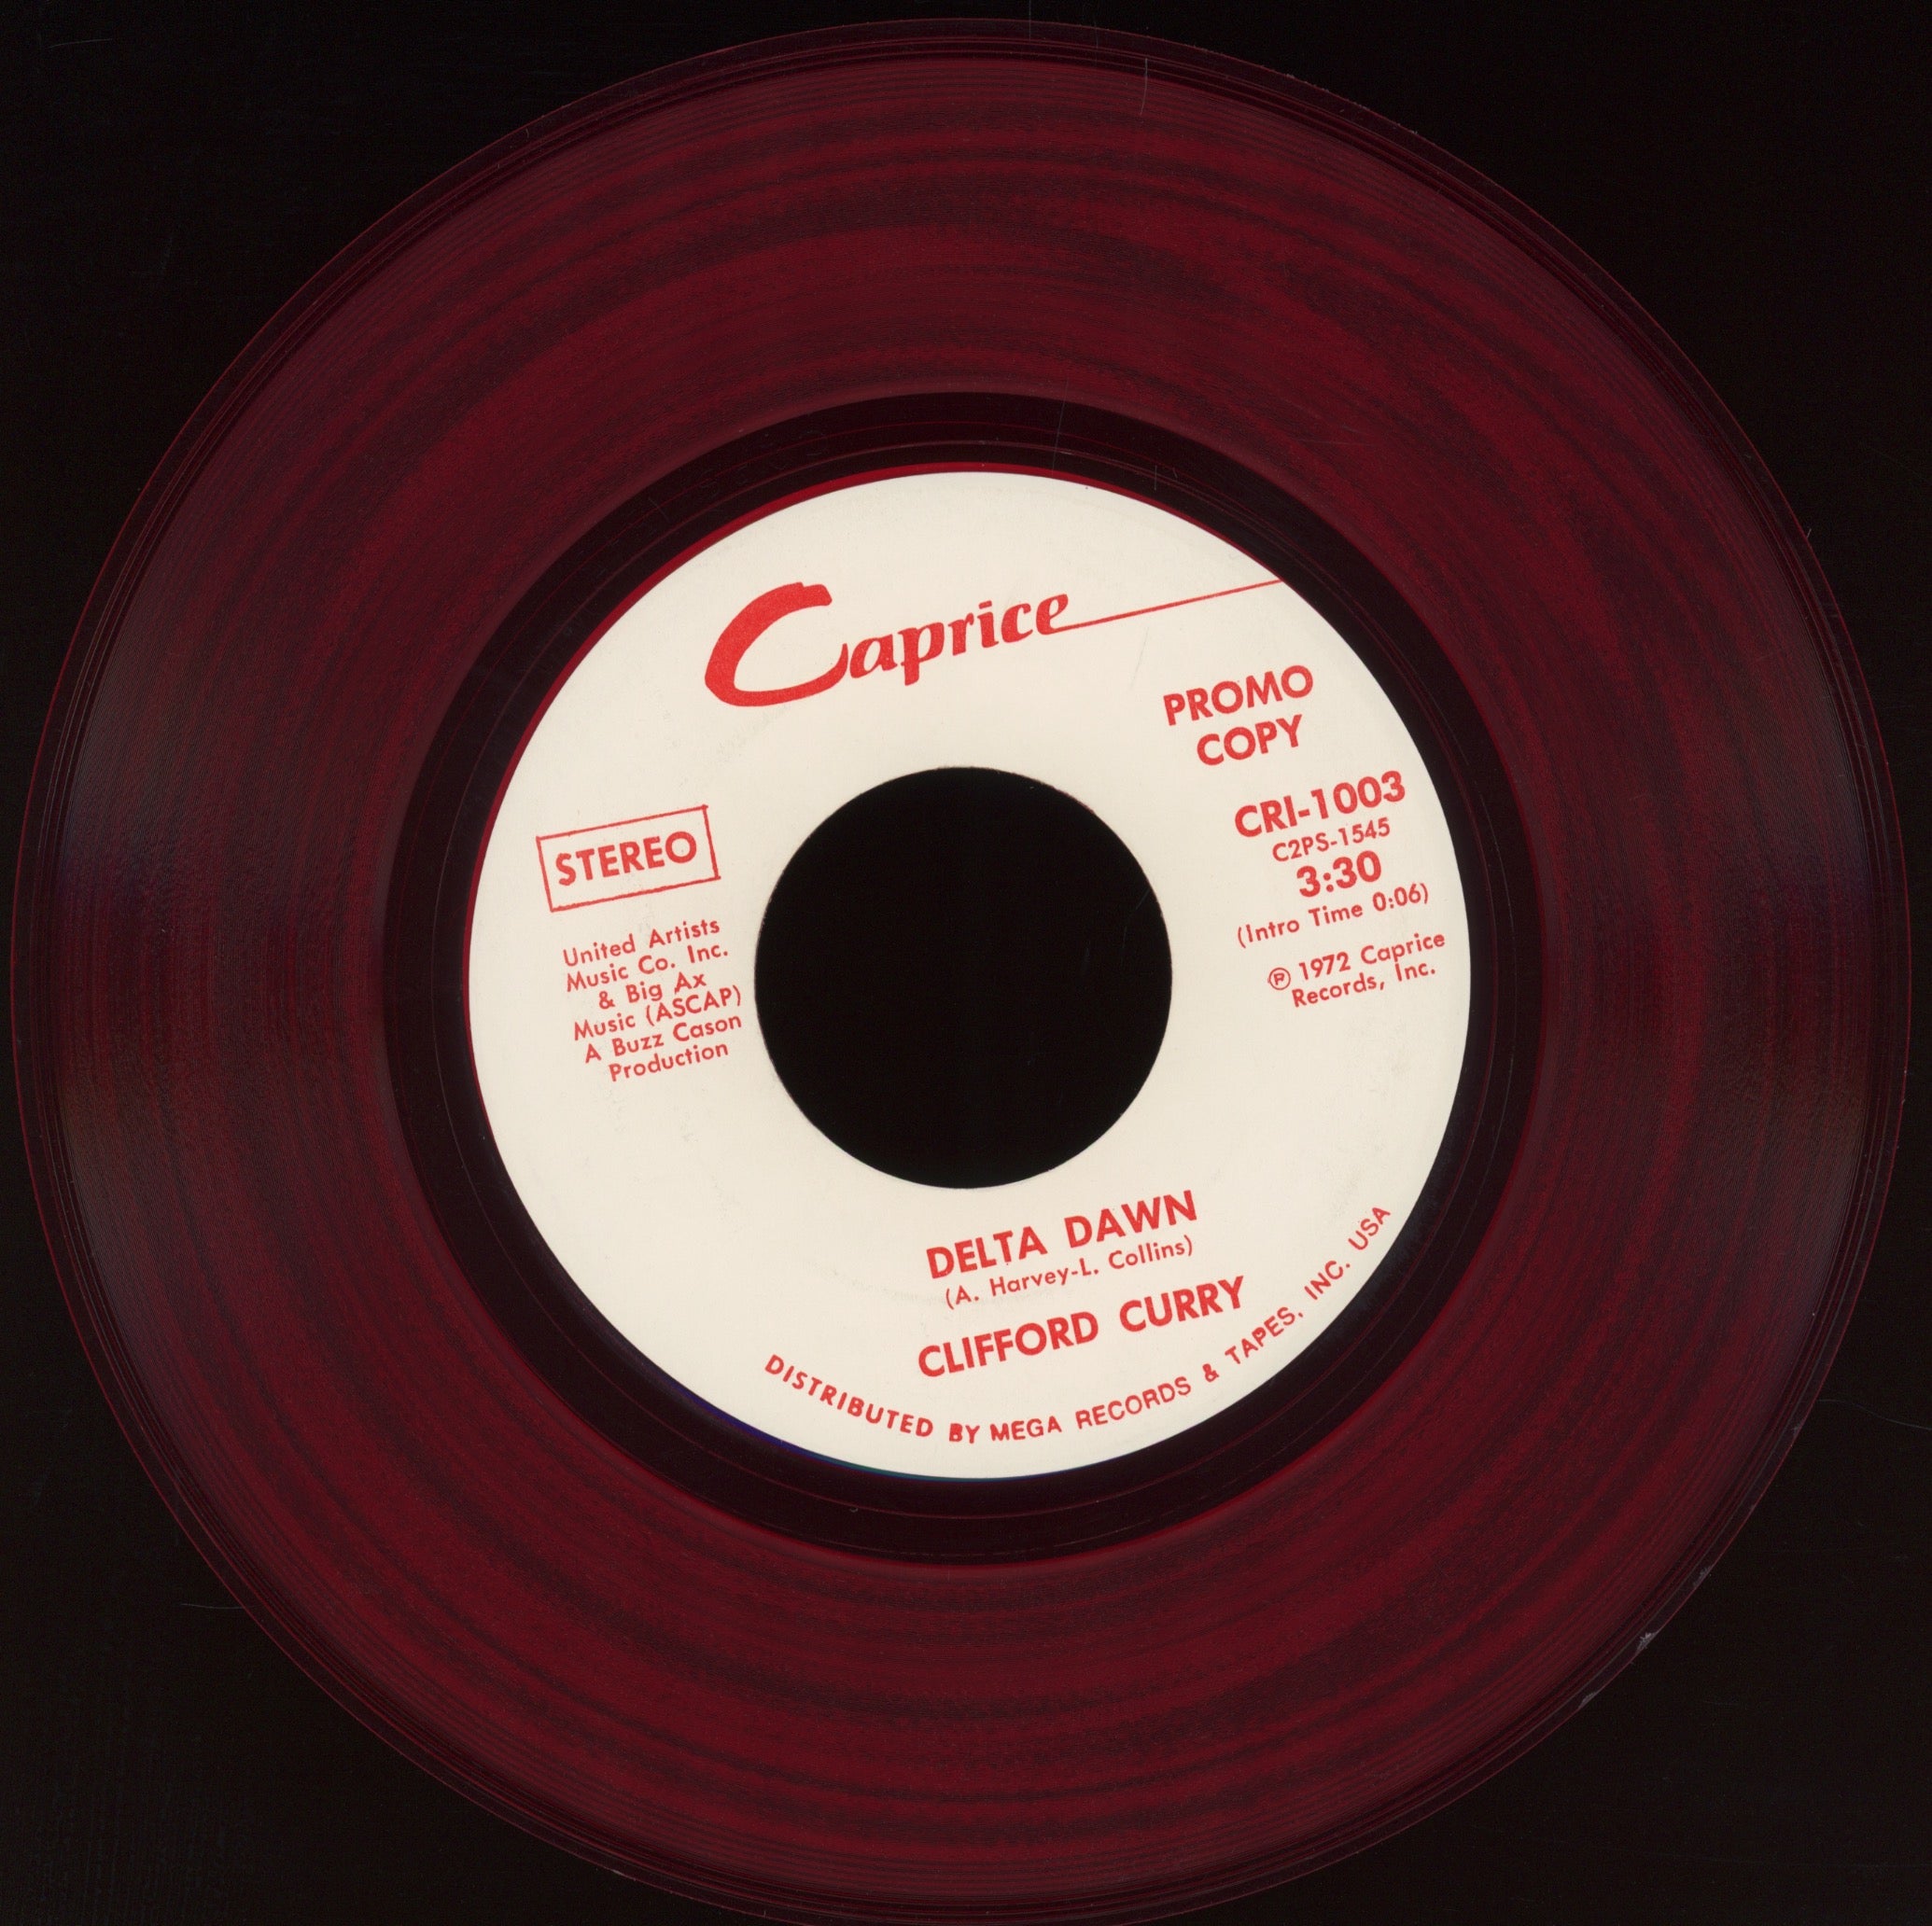 Clifford Curry - Delta Dawn on Caprice Red Vinyl Promo Funk 45 Breaks